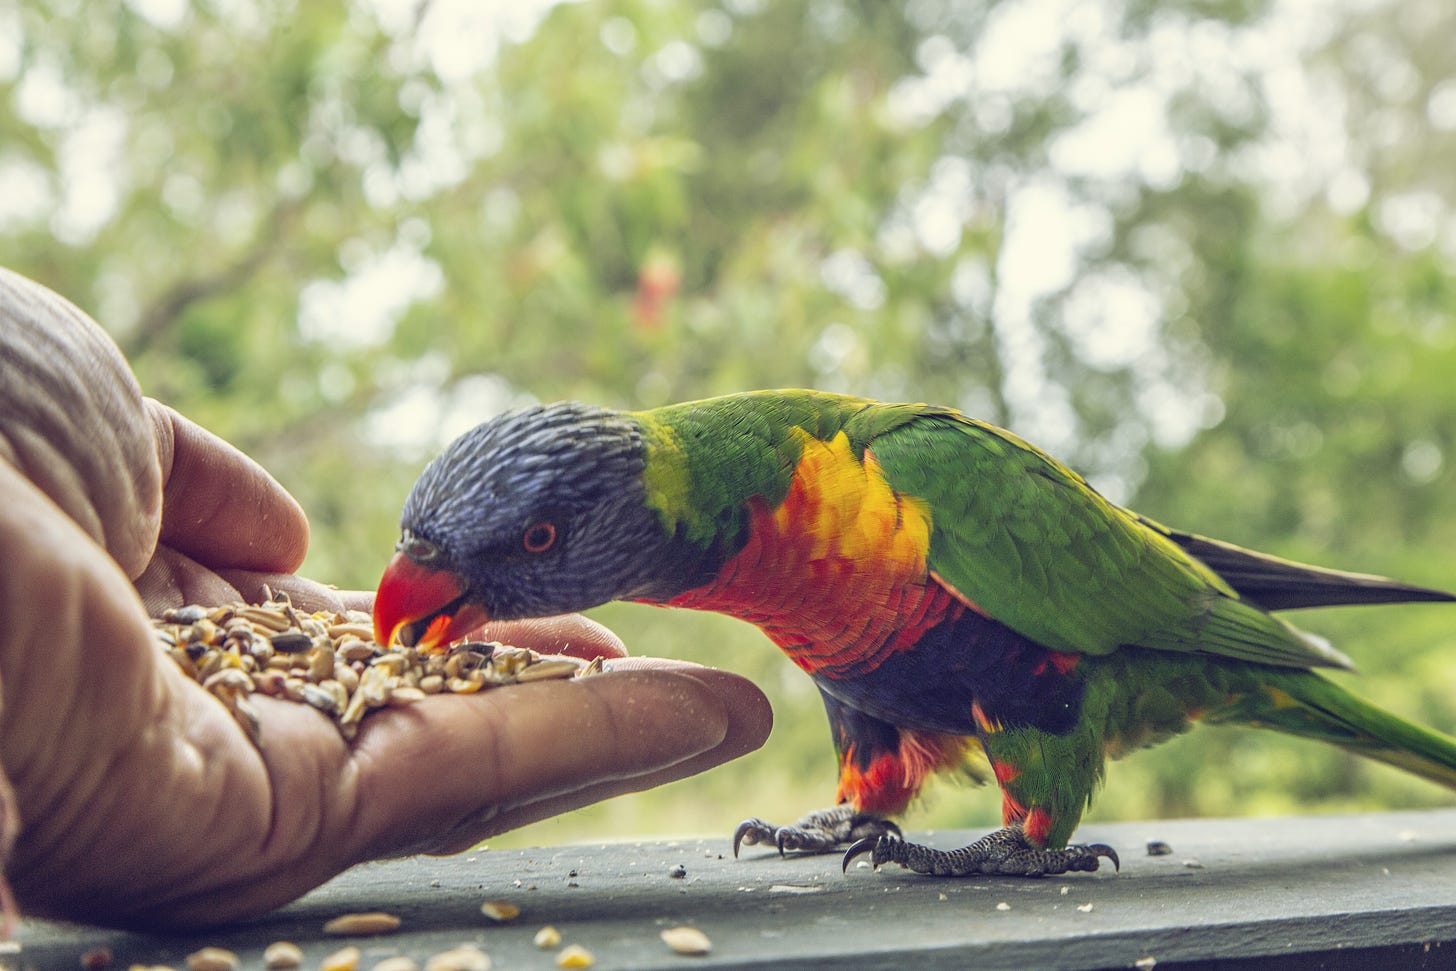 Exotic, multicolored bird eating out of a human hand. Looks like seeds. I'm no ornithologist nor nutritionist. 